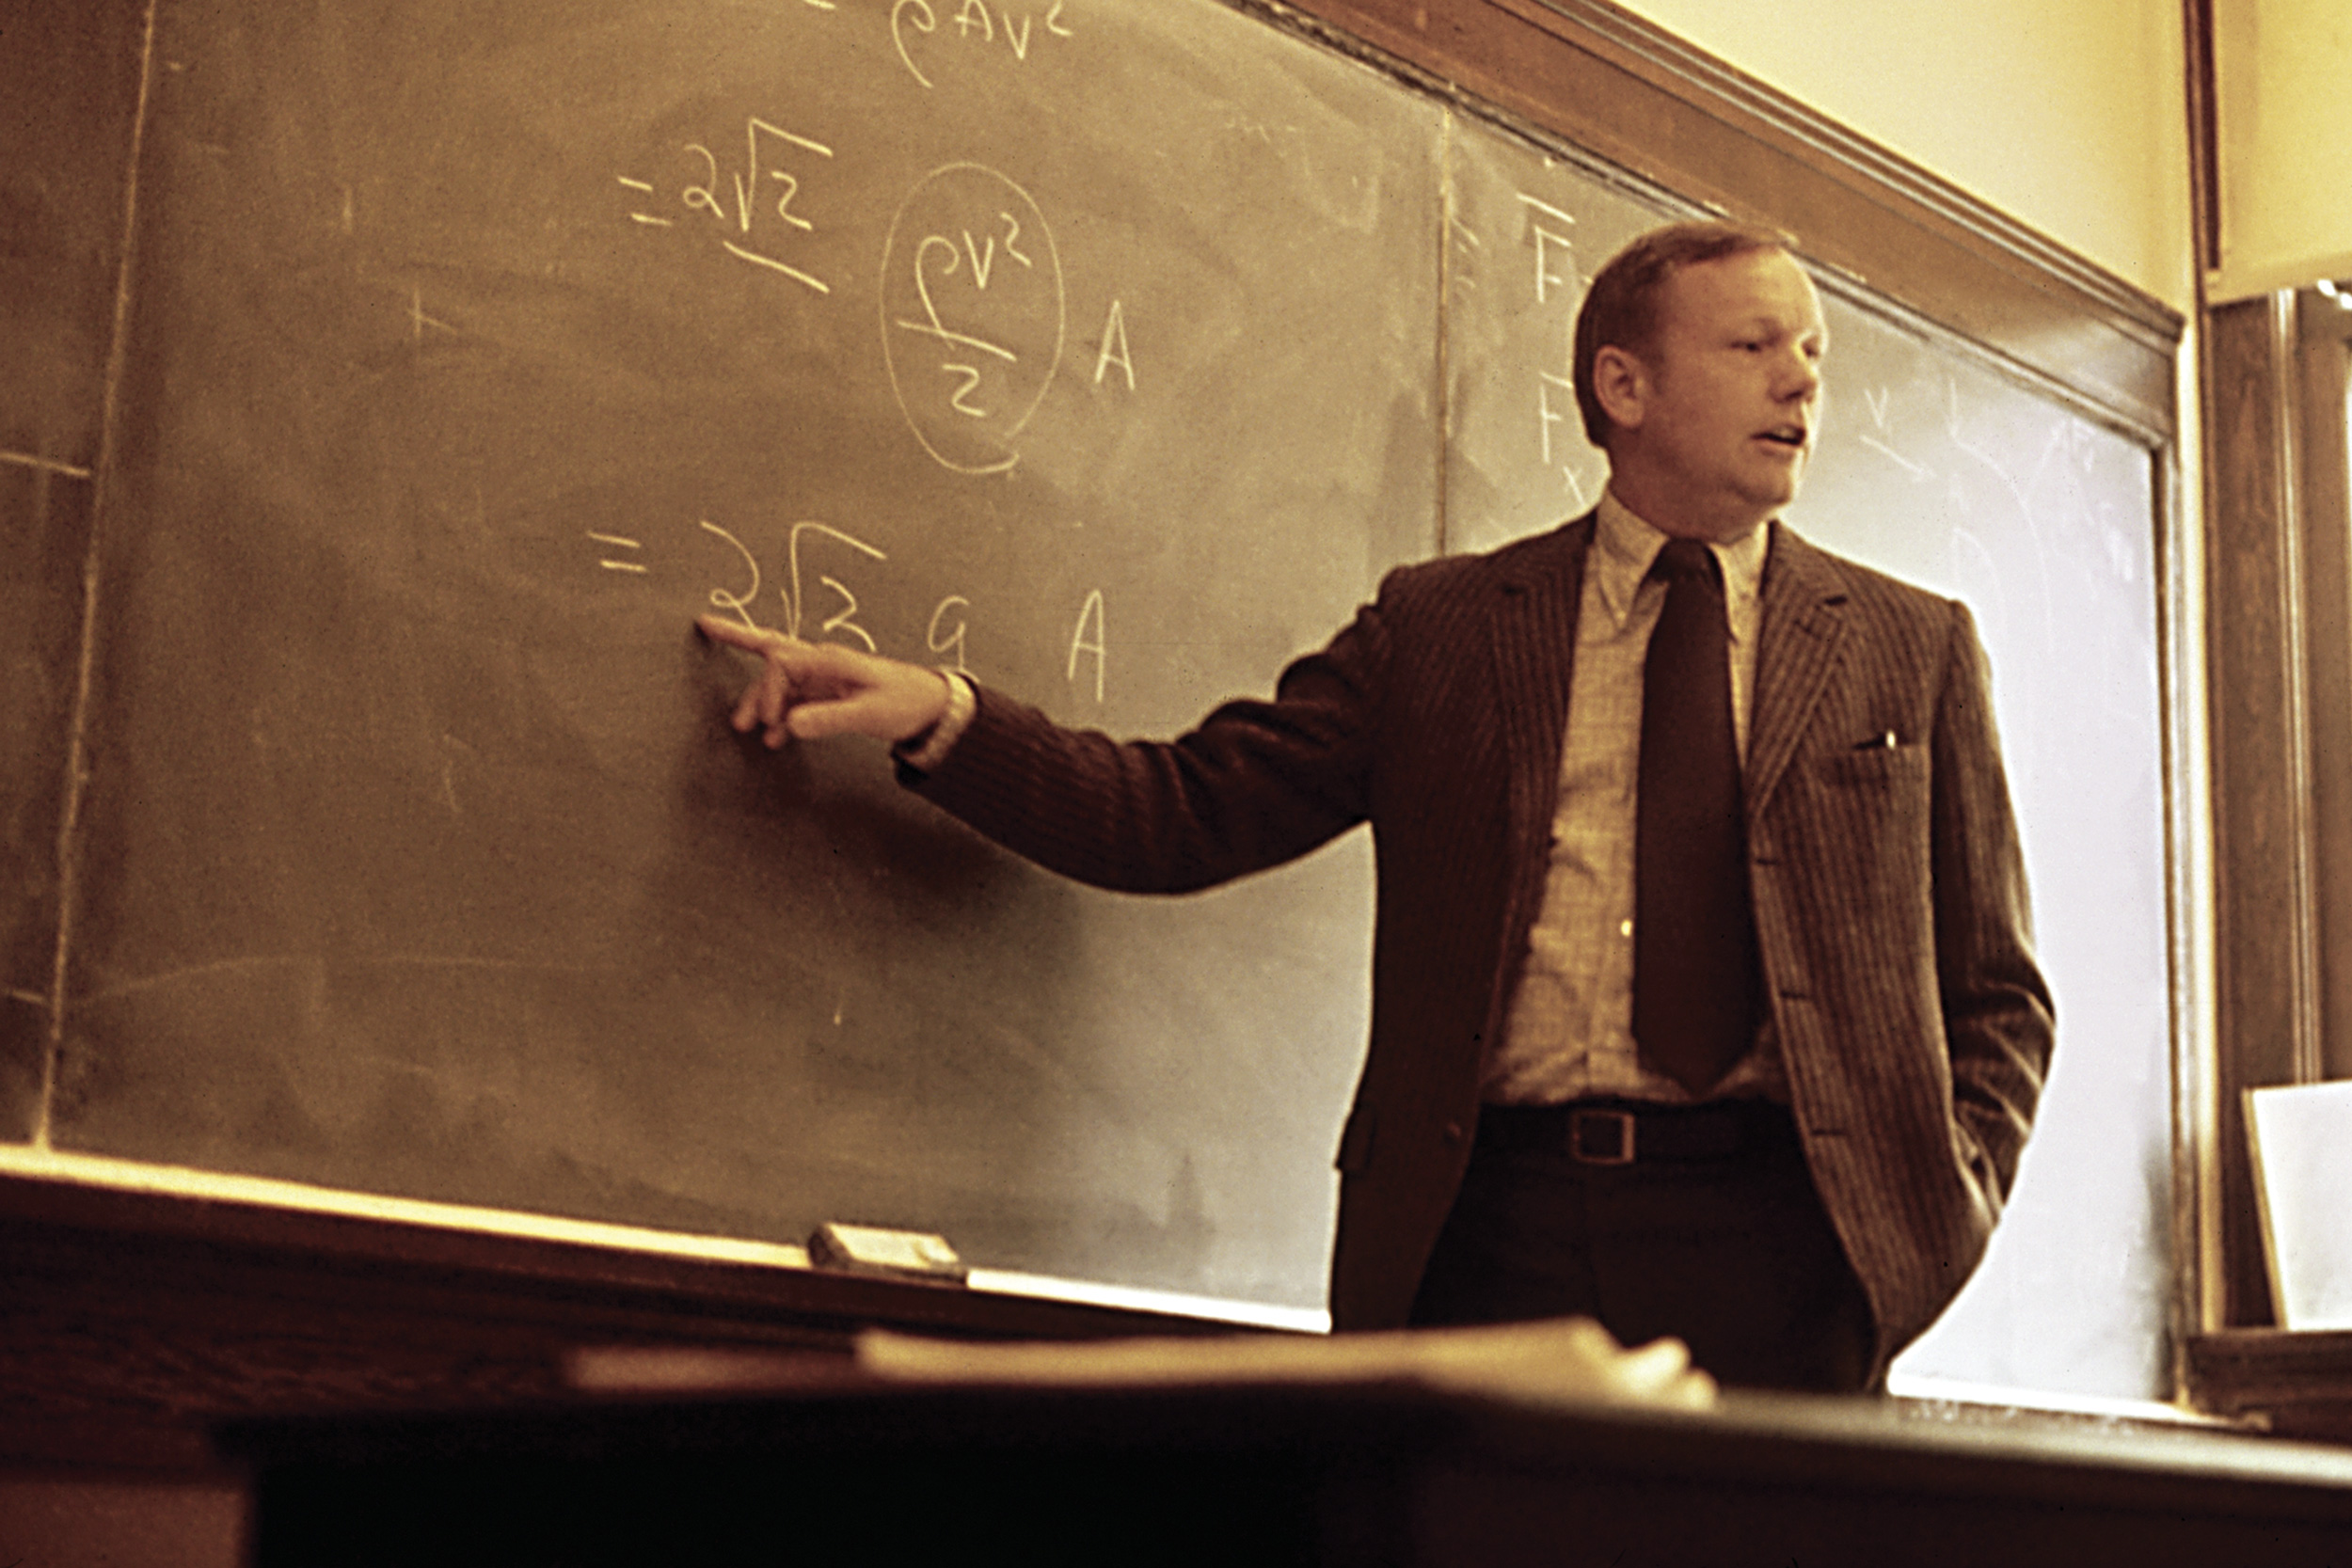 Former astronaut Neil Armstrong leads a class at the University of Cincinnati